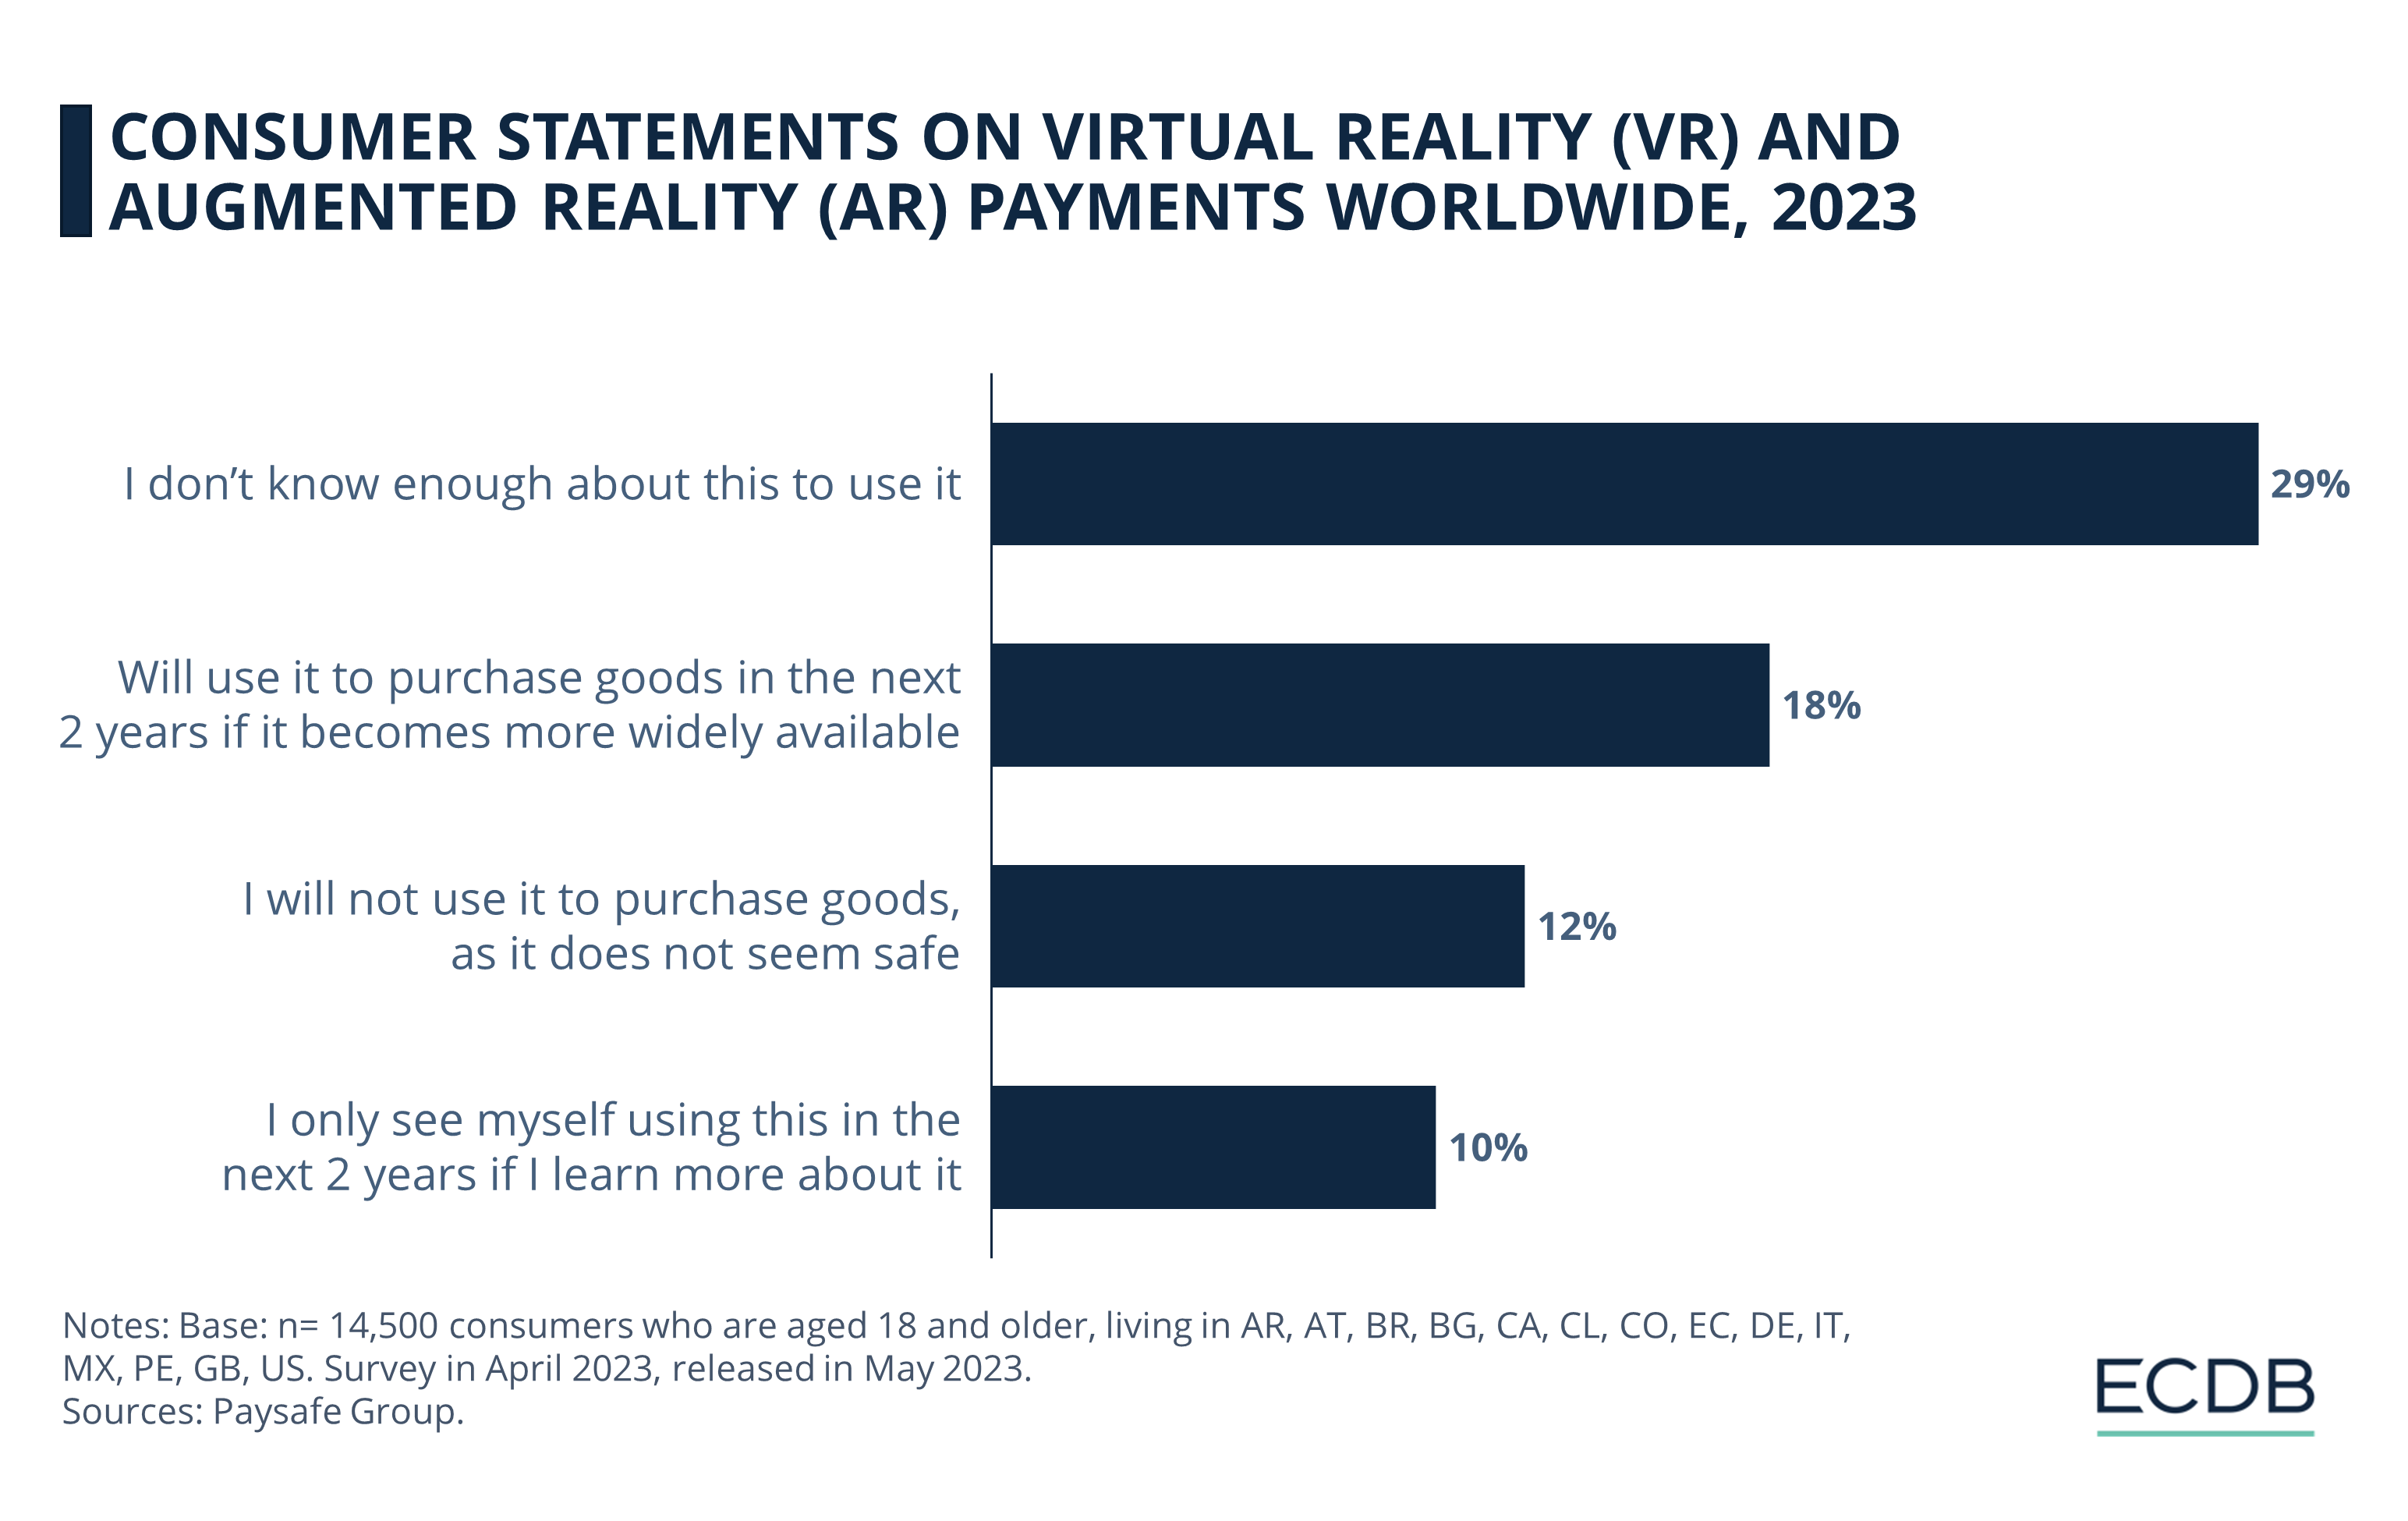 Consumer Statements on Virtual Reality (VR) and Augmented Reality (AR) Payments Worldwide, 2023